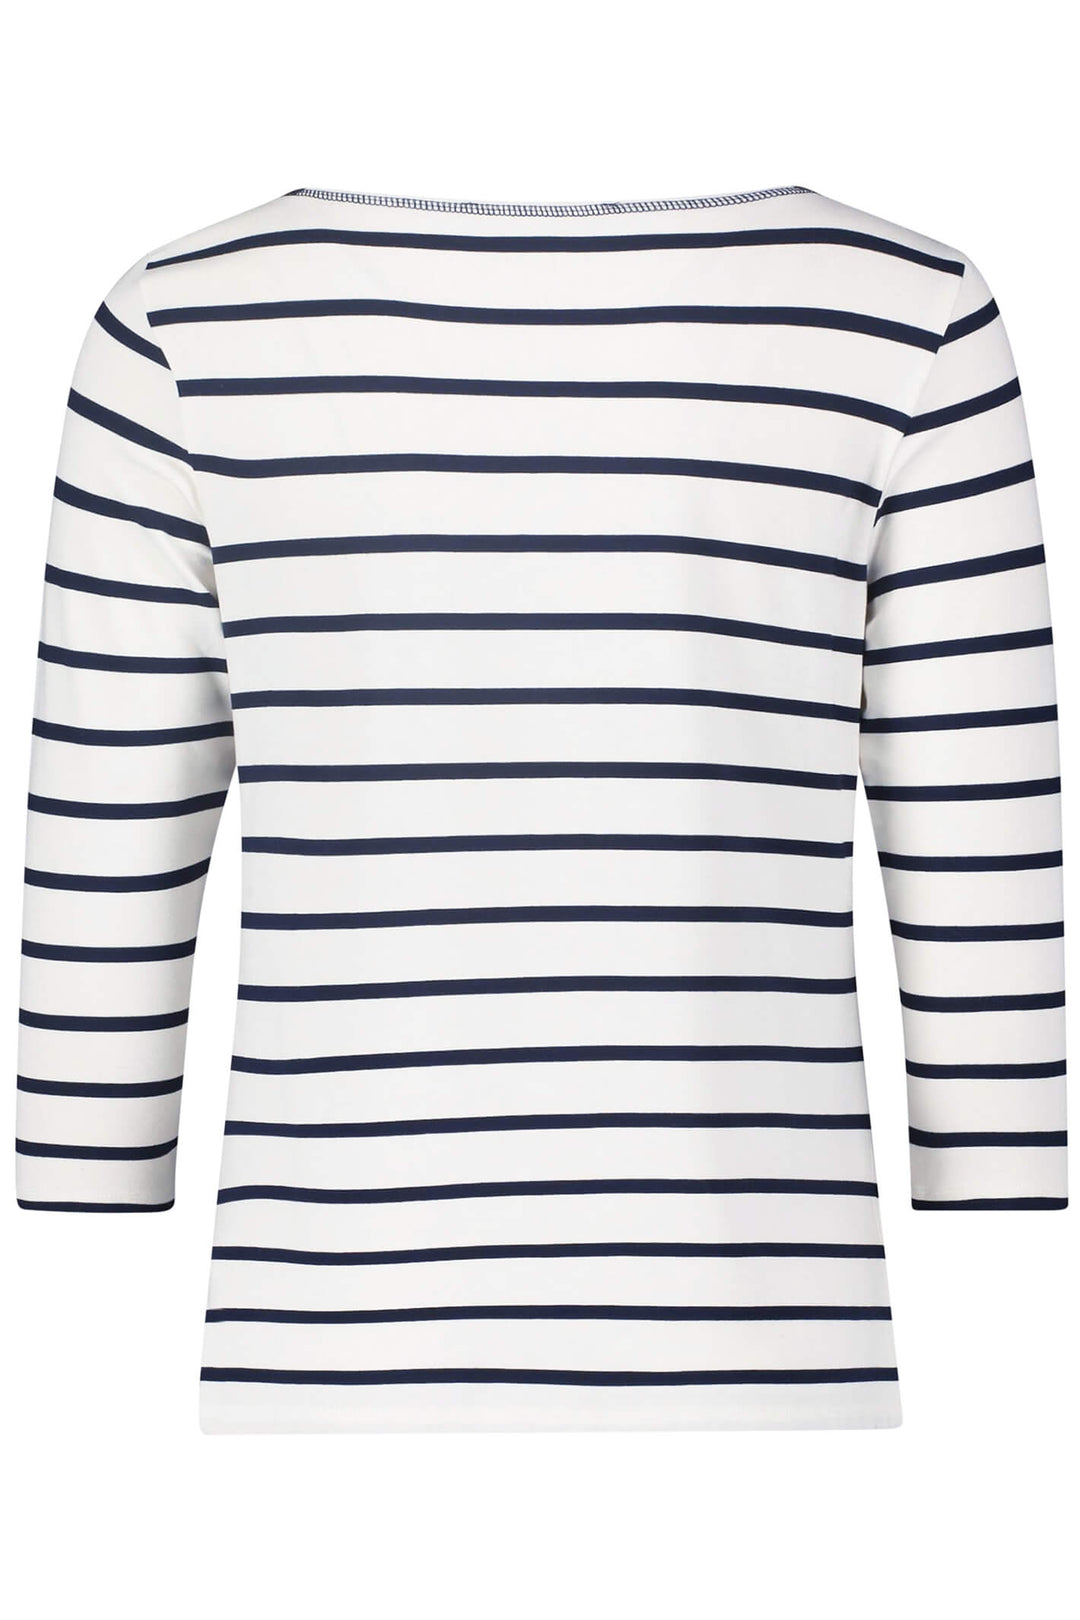 Betty Barclay 2848 2112 1883 Cream Navy Striped Breton Style Top - Dotique Chesterfield